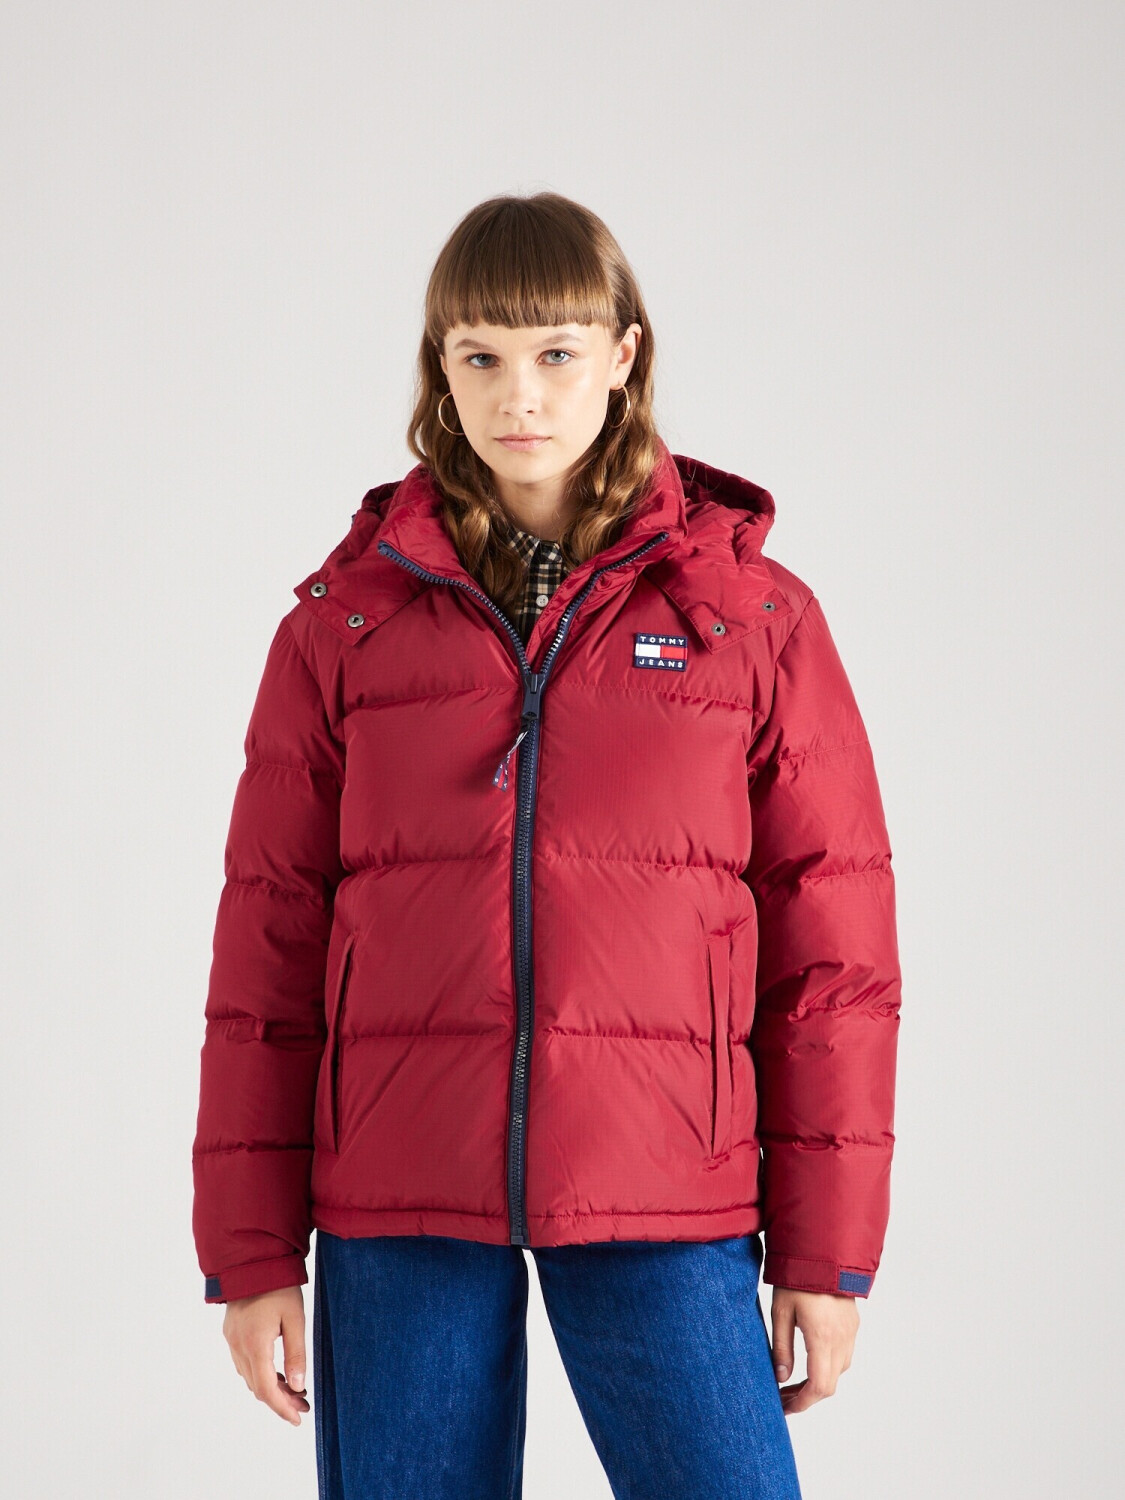 Buy Tommy Hilfiger Alaska £159.20 Best Jacket – Puffer (DW0DW14661) (Today) rouge Deals on from